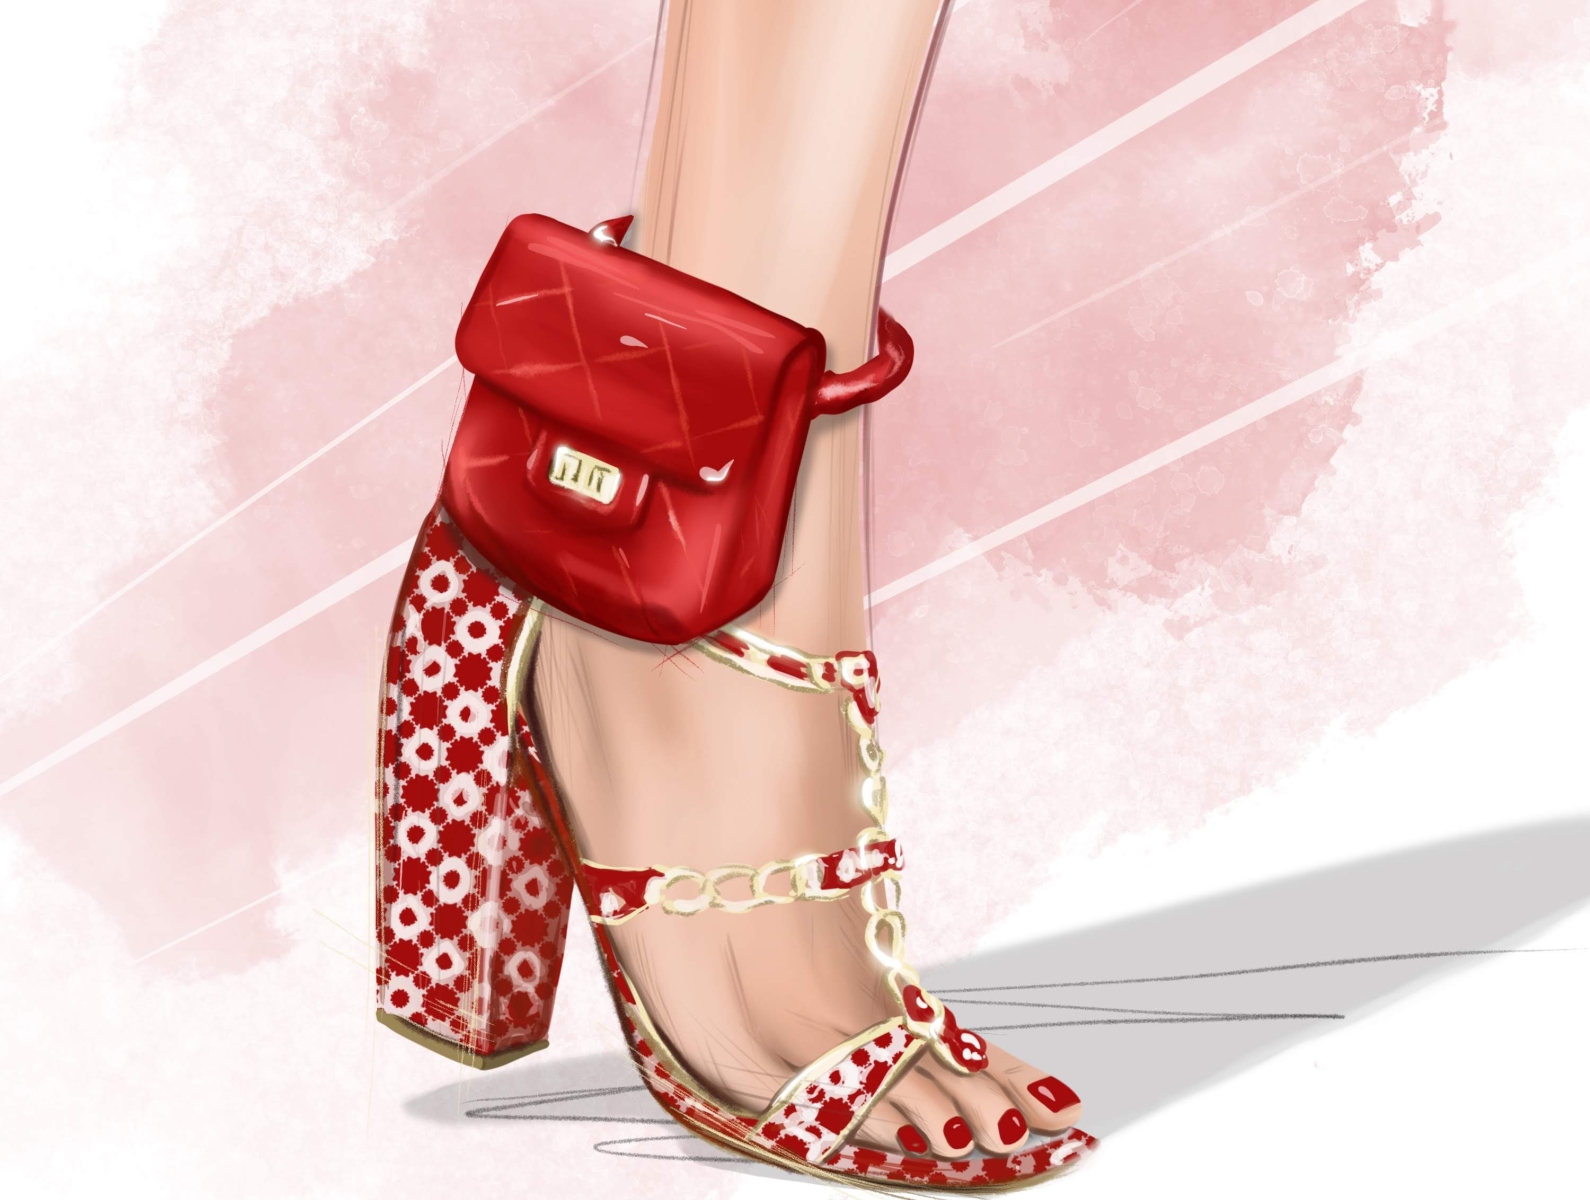 Ankle bag Chanel by CheLia on Dribbble